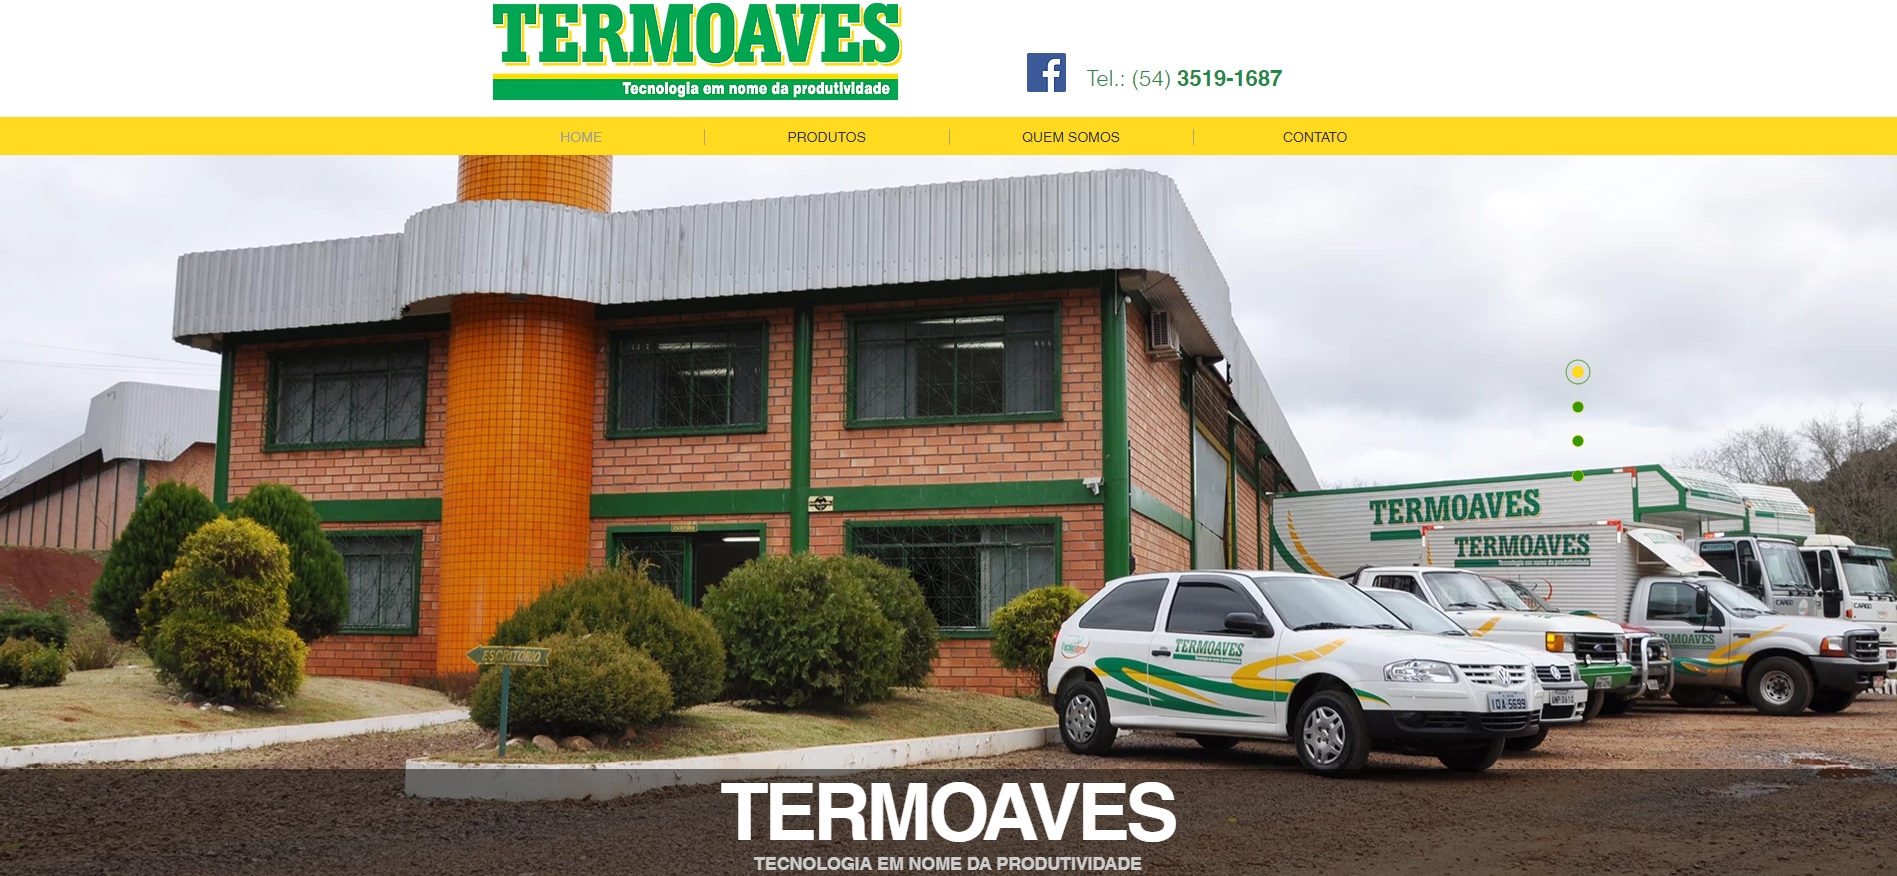 Termoaves